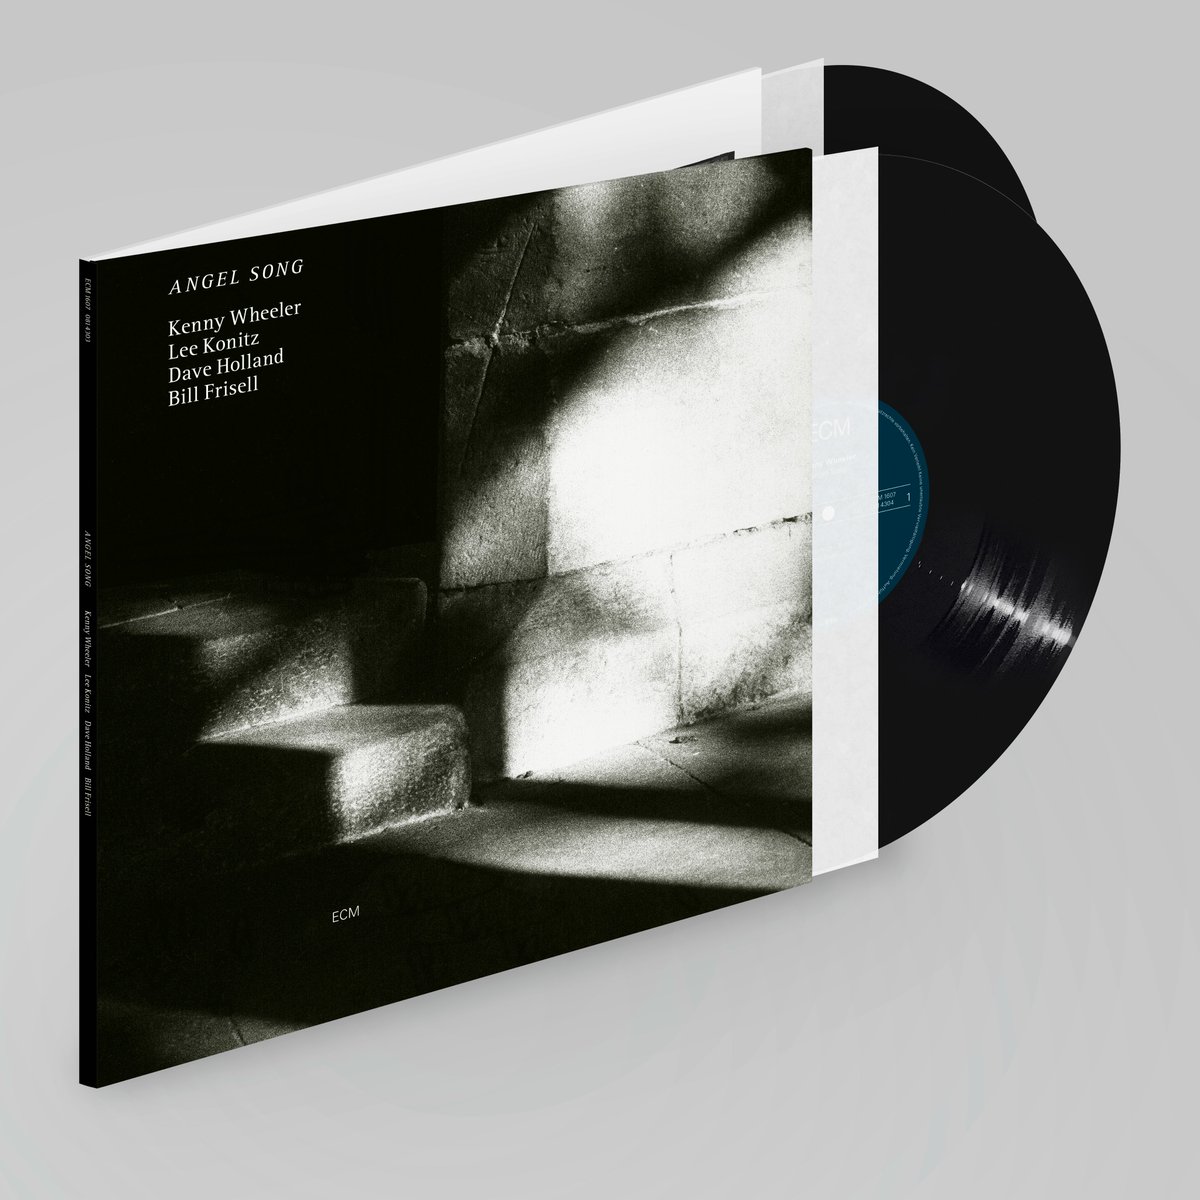 FIRST TIME ON VINYL:
Kenny Wheeler - Angel Song will be released on 31 May on 2-LPs in tip-on gatefold packaging.

Pre-order here: ECM.lnk.to/AngelSong